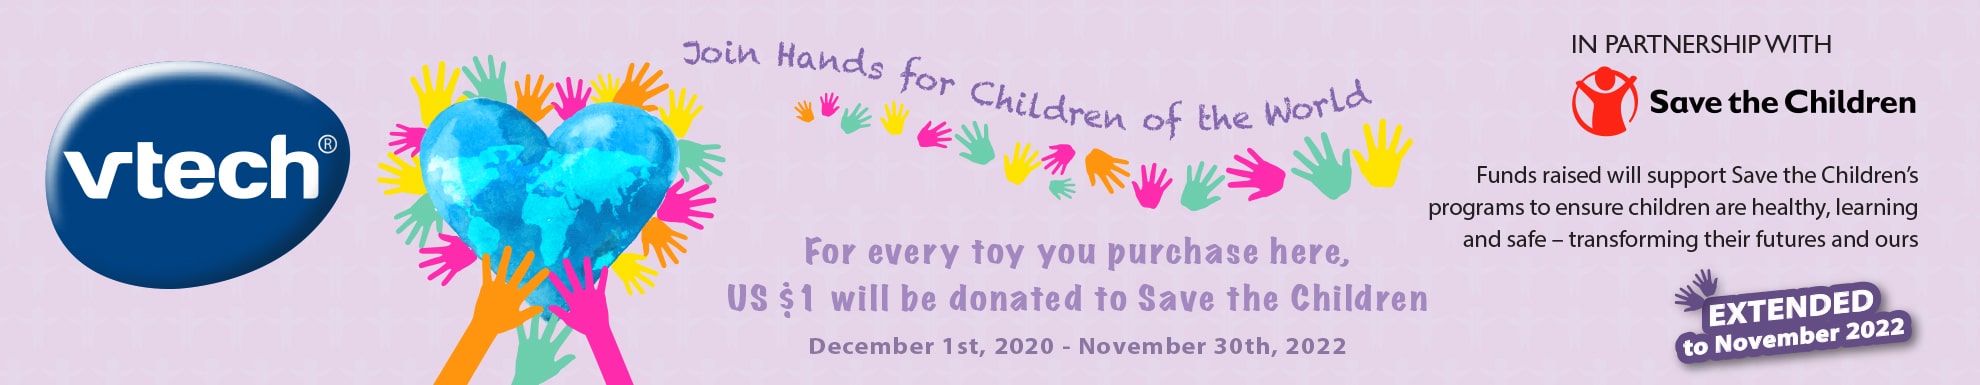 Join Hands for Children of the World - For every toy you purchase here, $1 USD will be donated to Save the Children